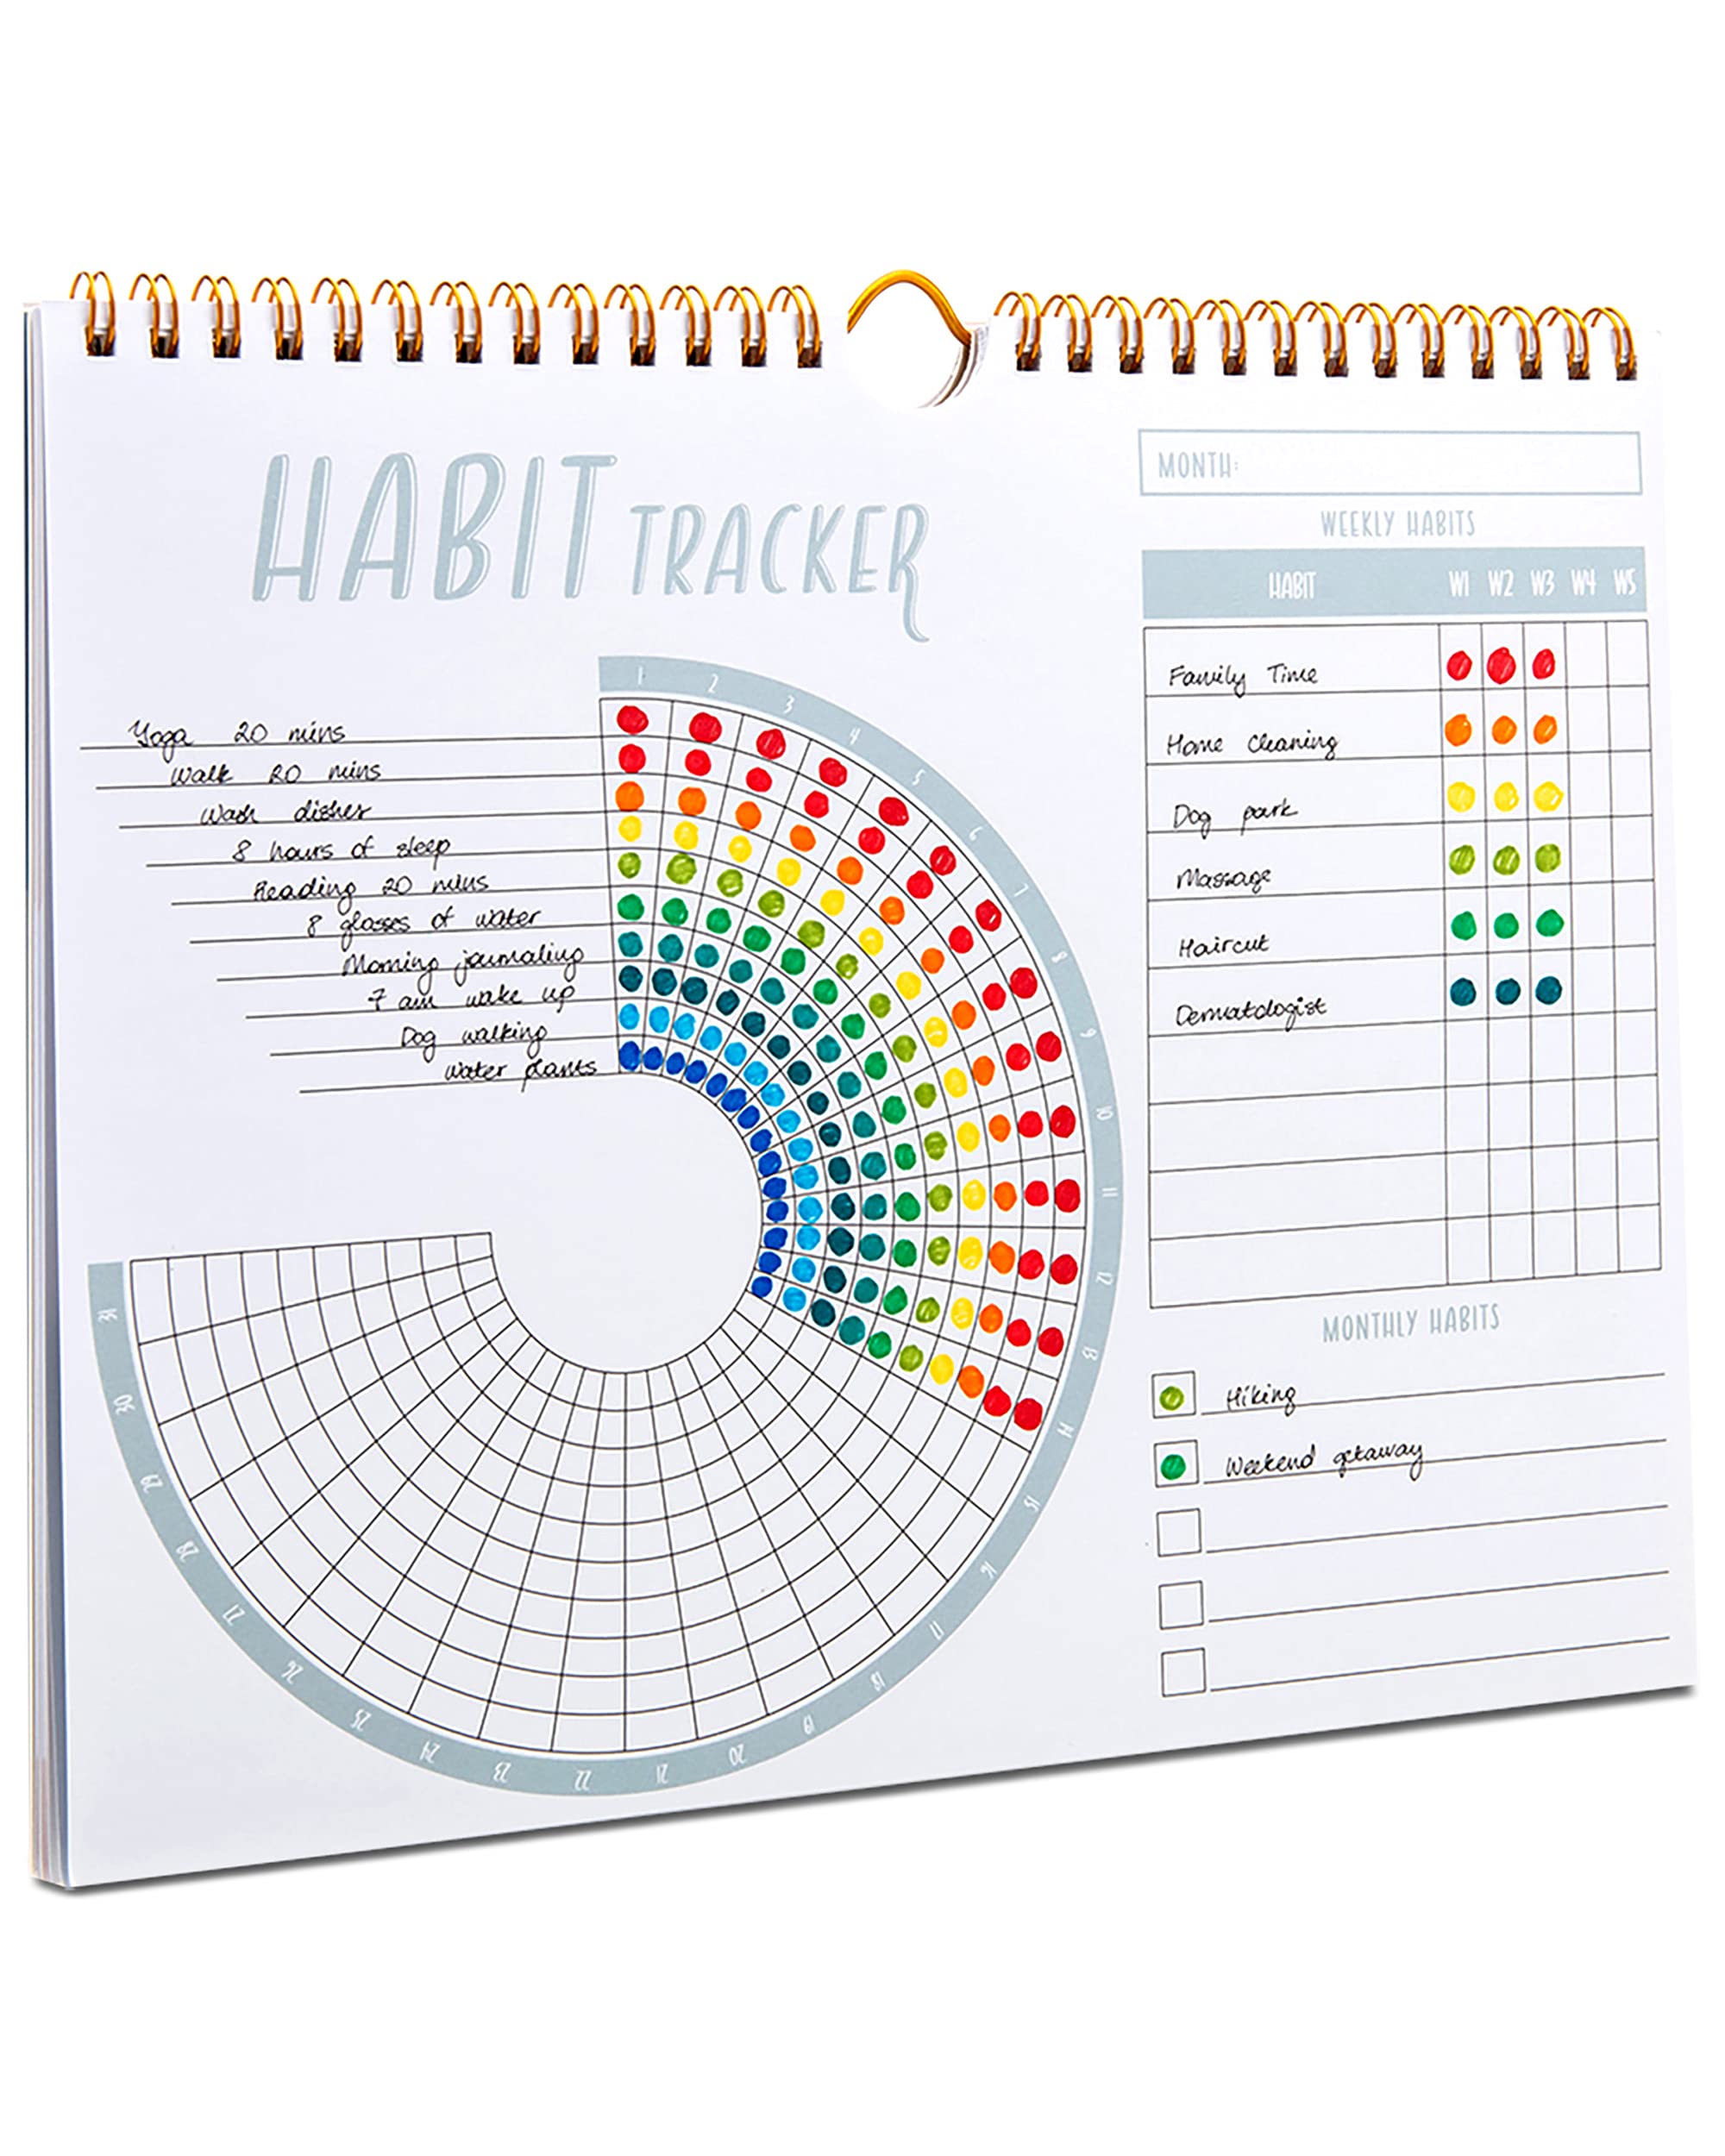  Daily Alignment Journal: Habit Tracker, Mindfulness